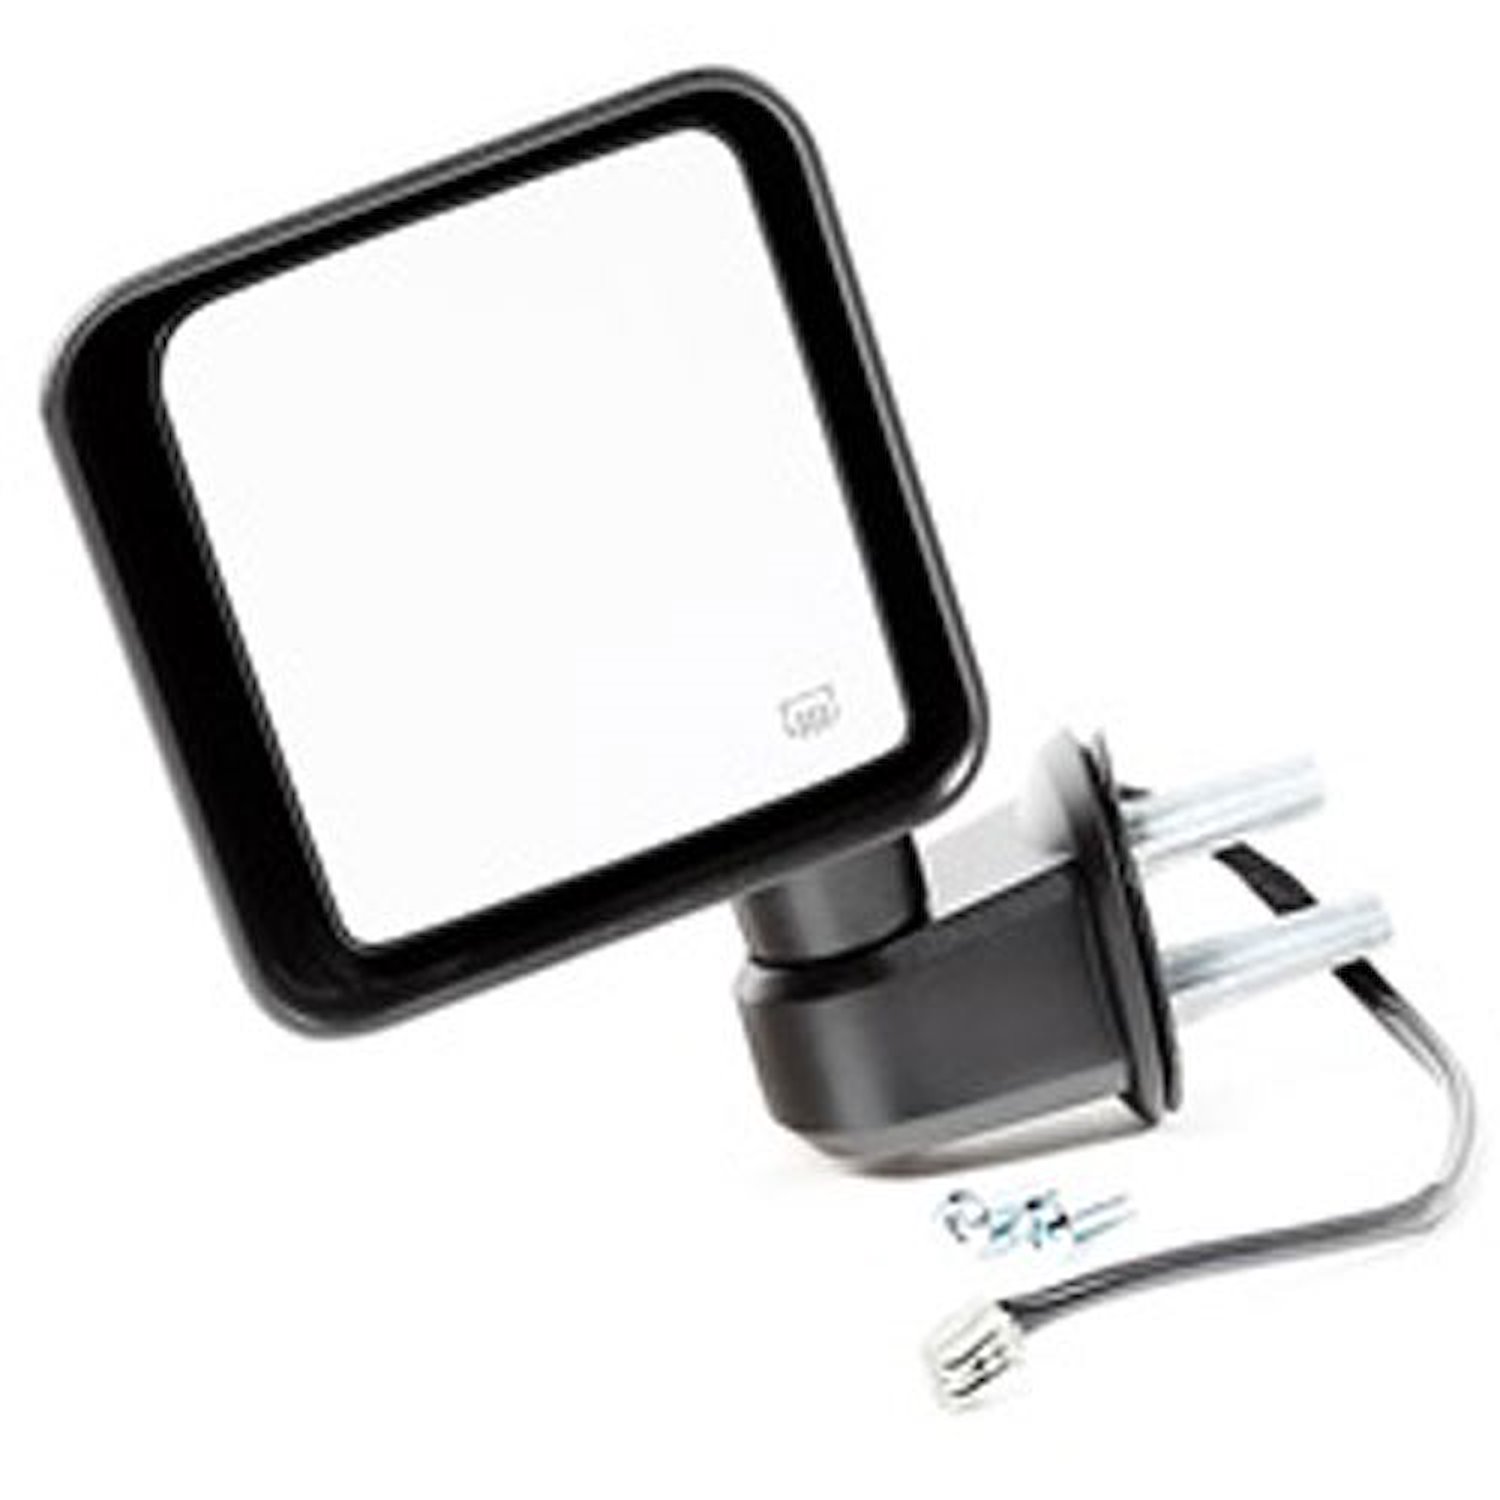 Replacement Black power-heated left side mirror from Omix-ADA,